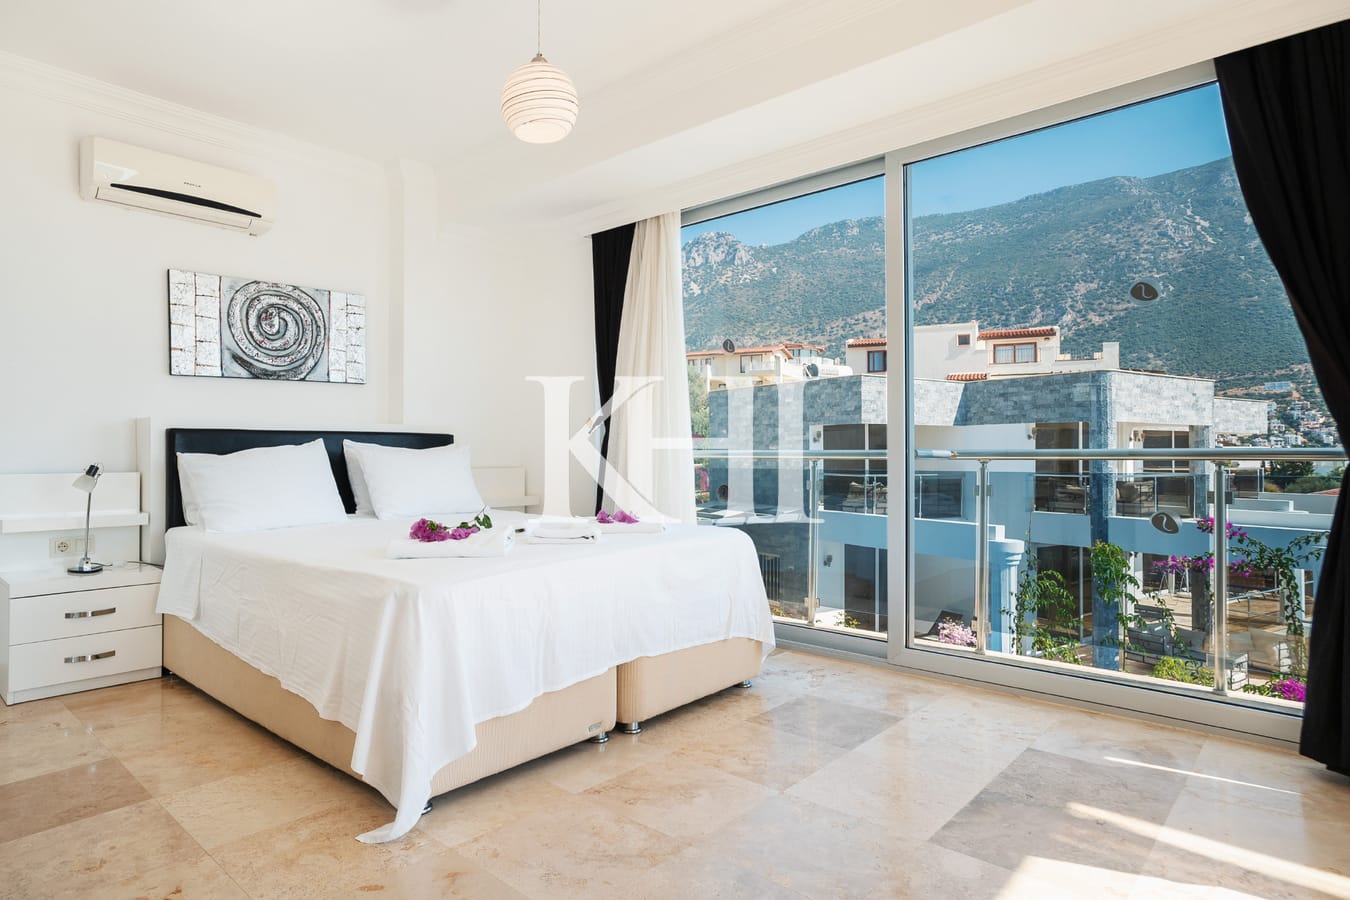 Detached Villa For Sale With Panoramic Kalkan View Slide Image 31